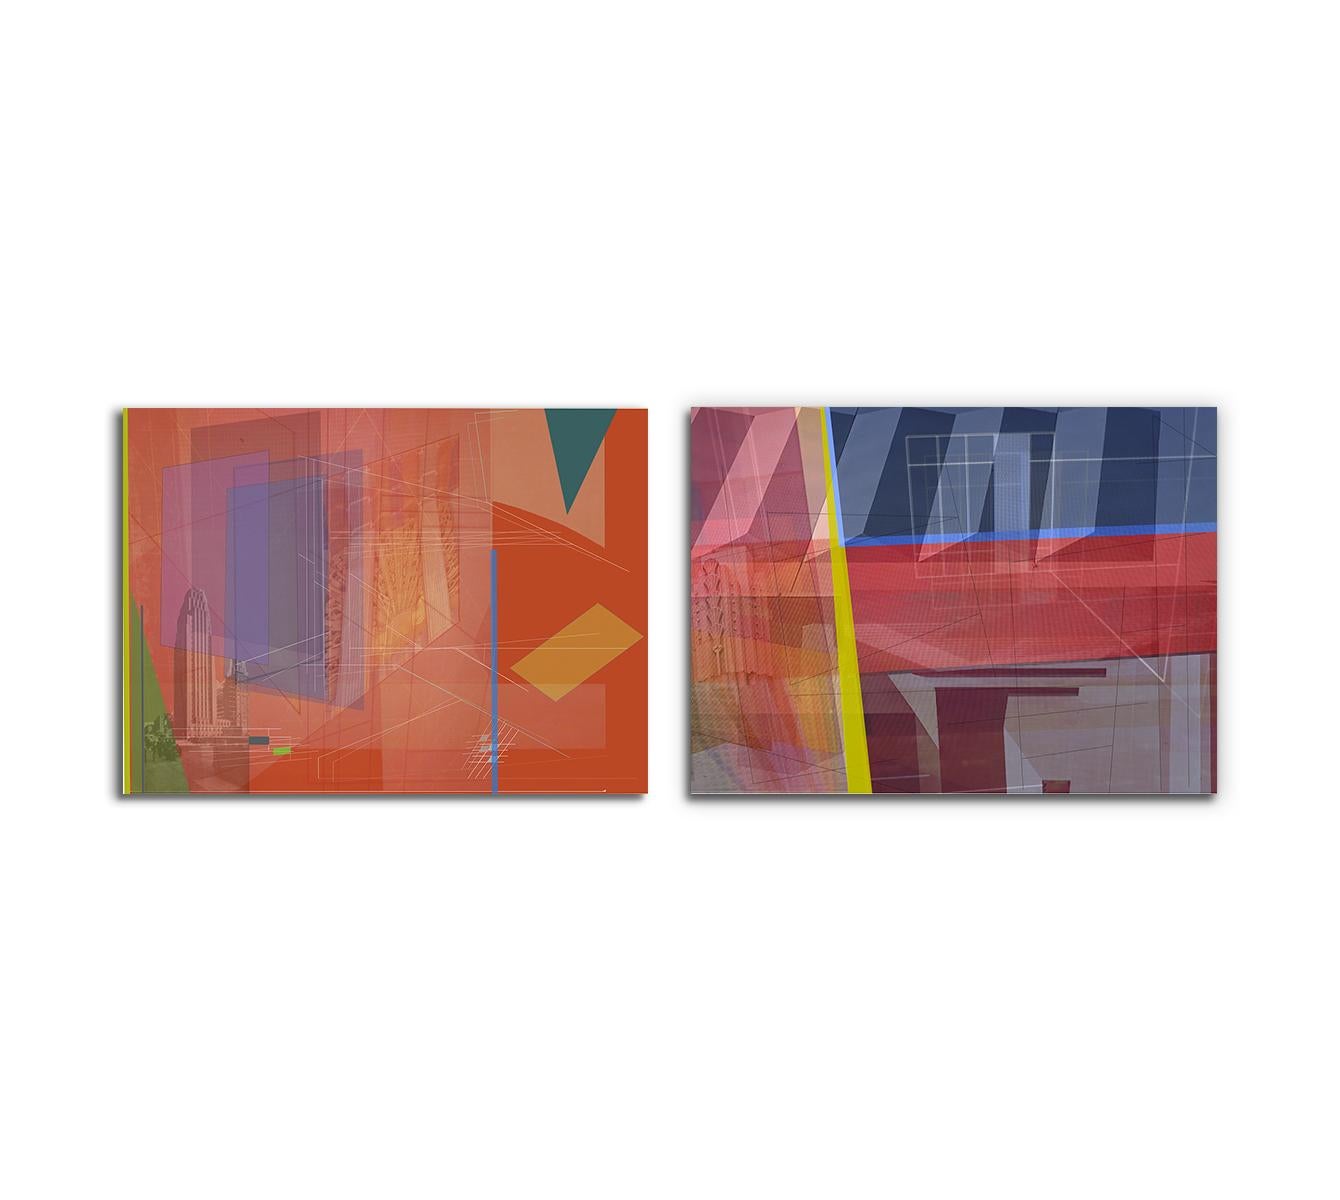 Monika Bravo Color Photograph - Parallel Fields #1 and #2. Abstract limited edition color photograph